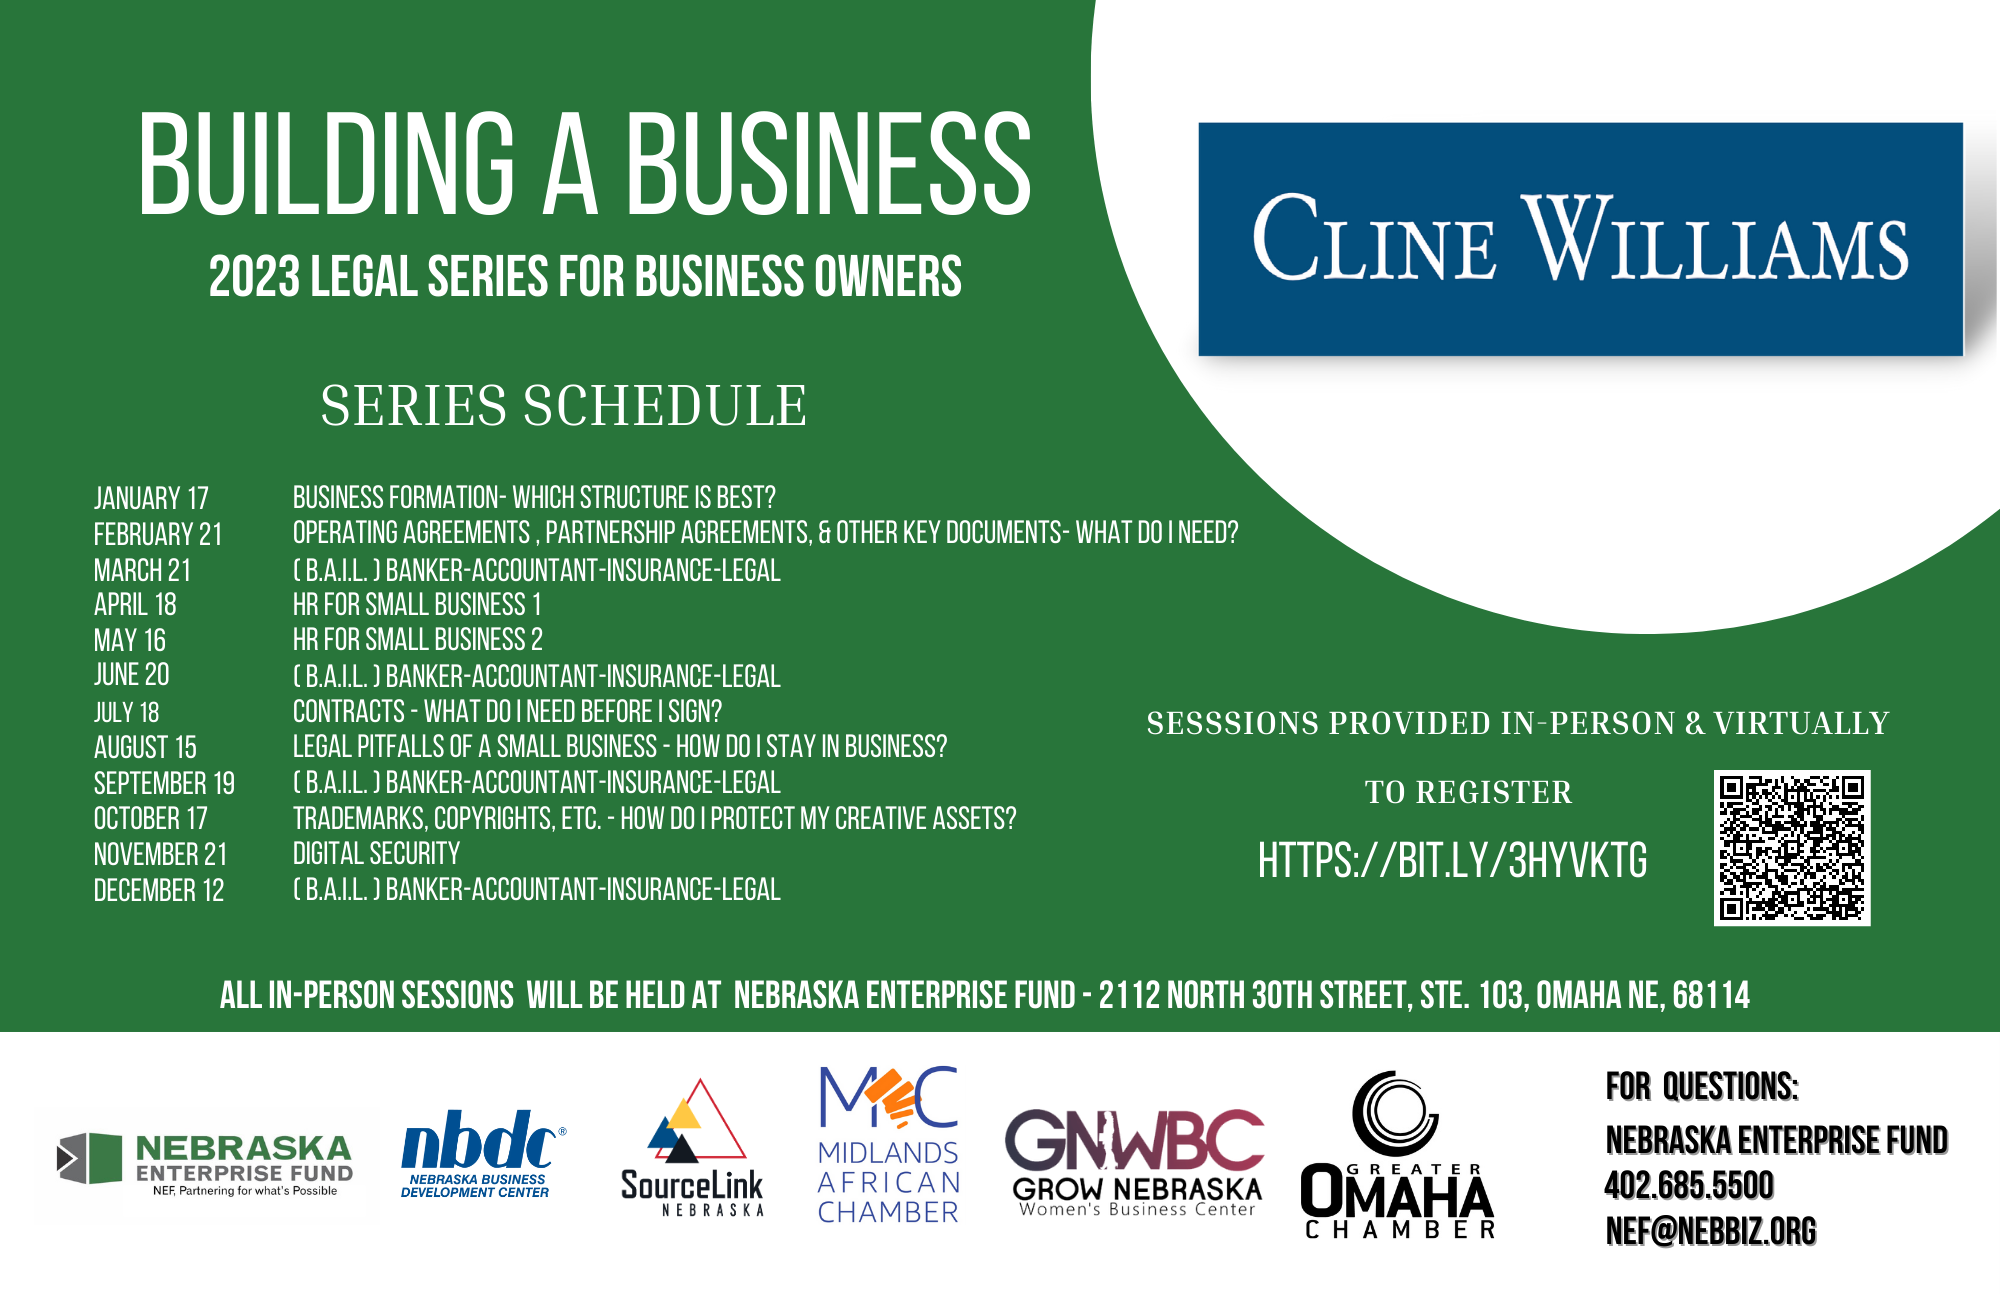 "Building a Business: Legal Series for Business Owners" Schedule & Registration Announced Photo